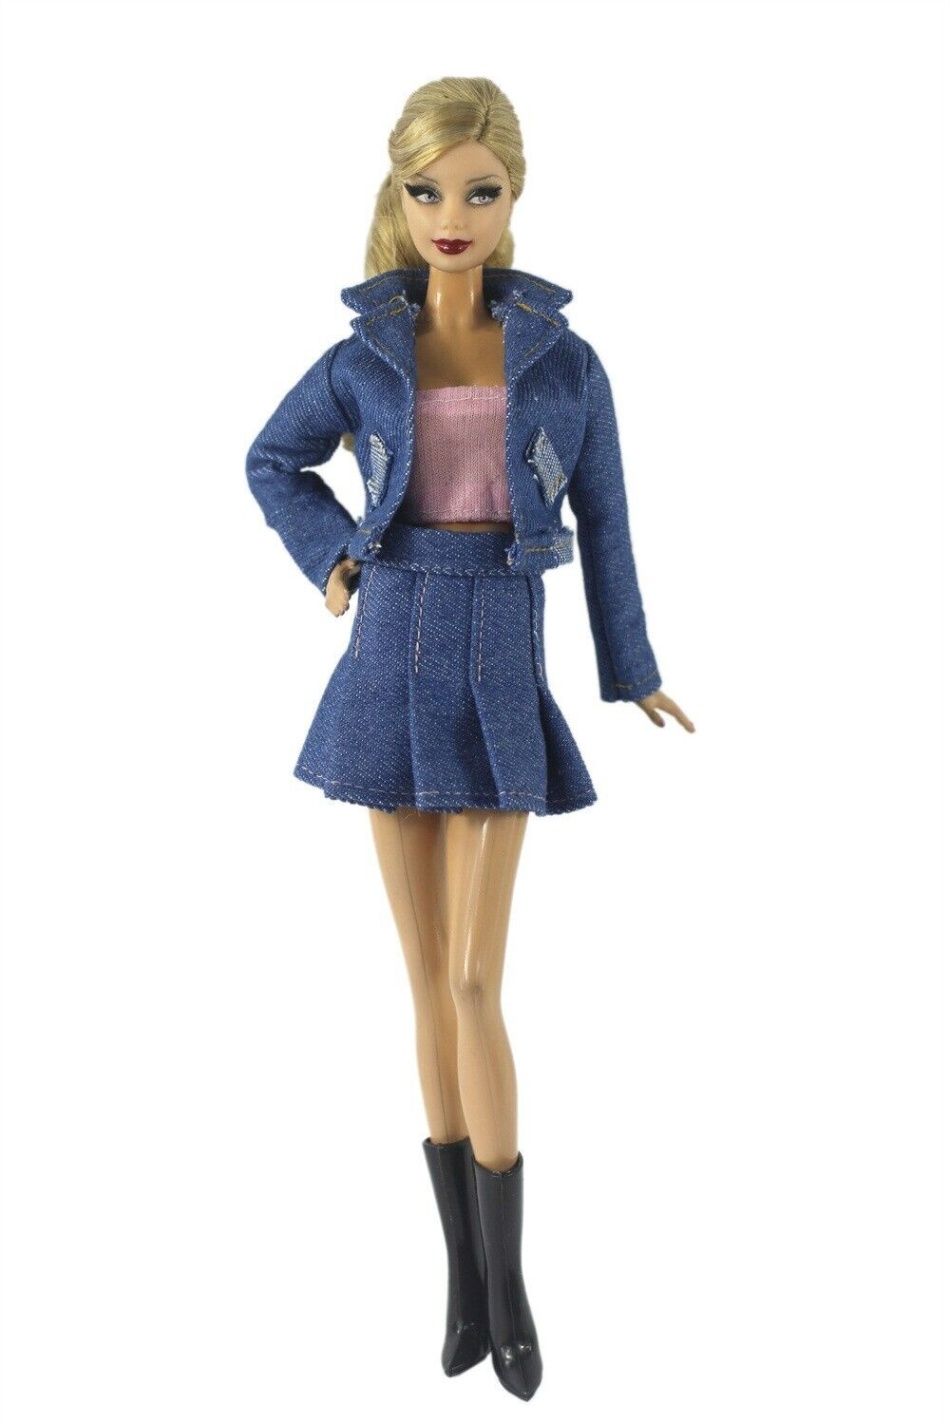 barbie denim outfit Bulan 5 Fashion / Doll Outfit Denim Jacket Skirt Top Boots For